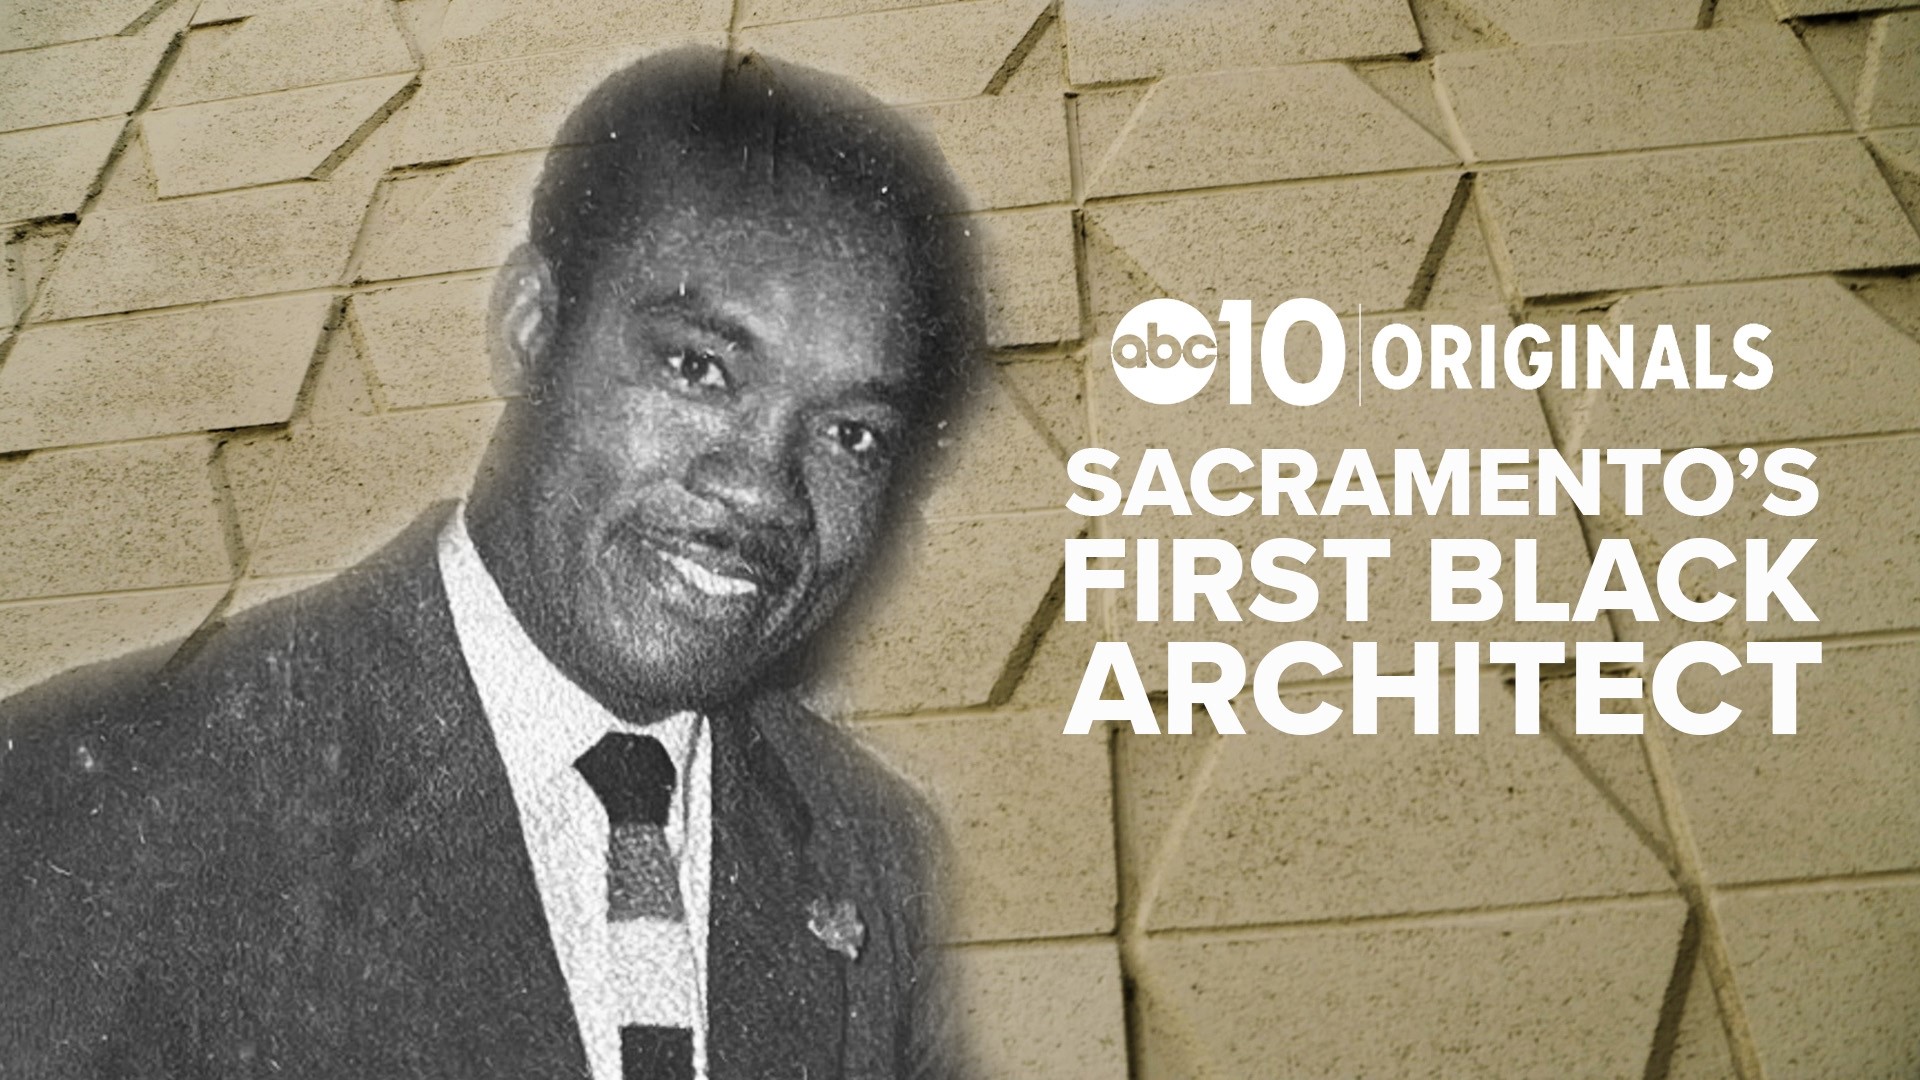 James Dodd is believed to be Sacramento's first Black architect, and he made an impact in mid-century architecture that can be seen all over Northern California.